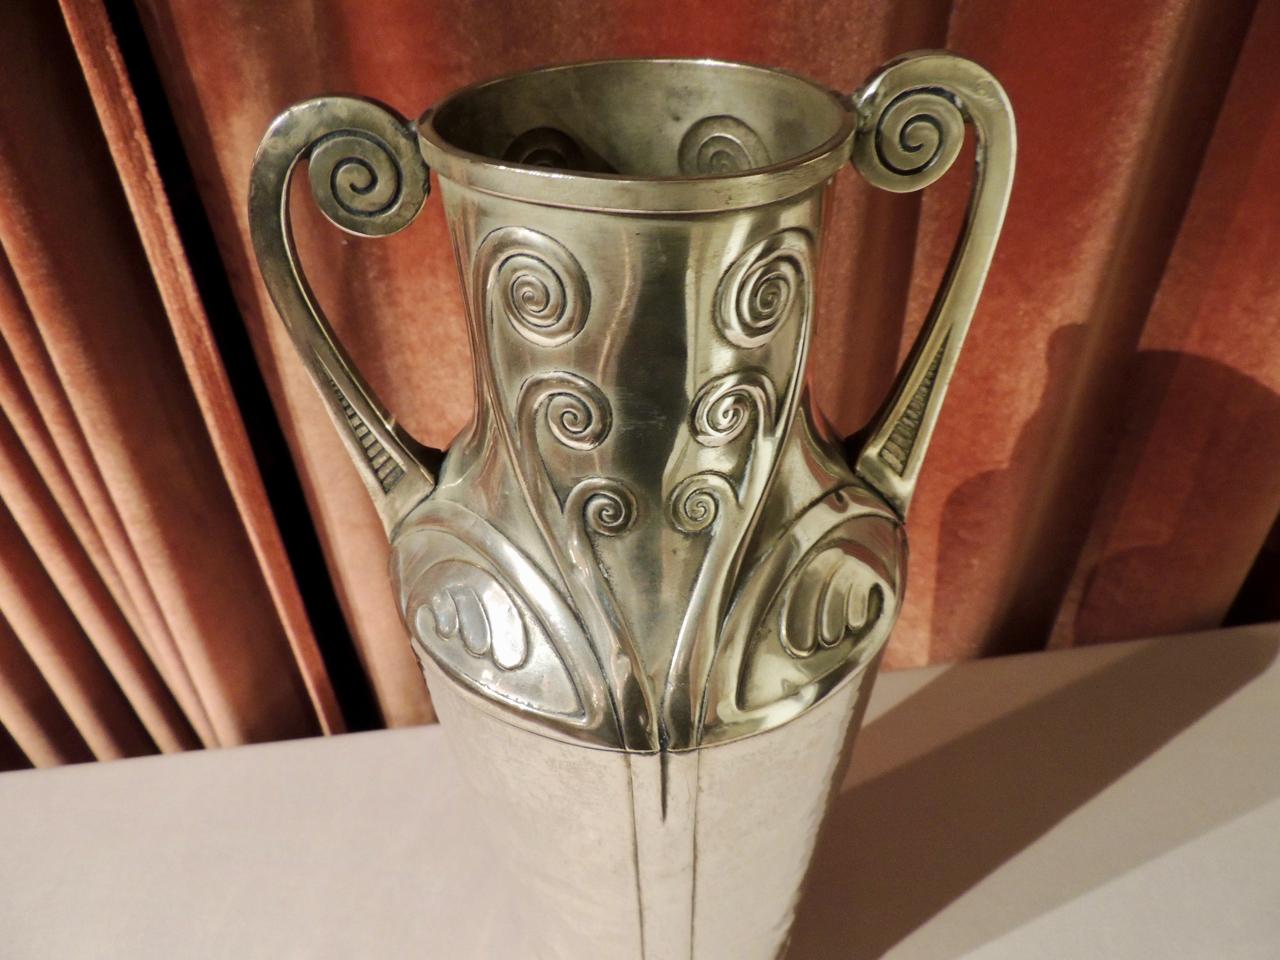 This tall Art Nouveau silver vase with hand-hammered details was made in Germany in the early 1900s. Designed by Carl Deffner of Esslingen, who was born in 1856 and took over the management of his father’s metalware factory in 1900. Three